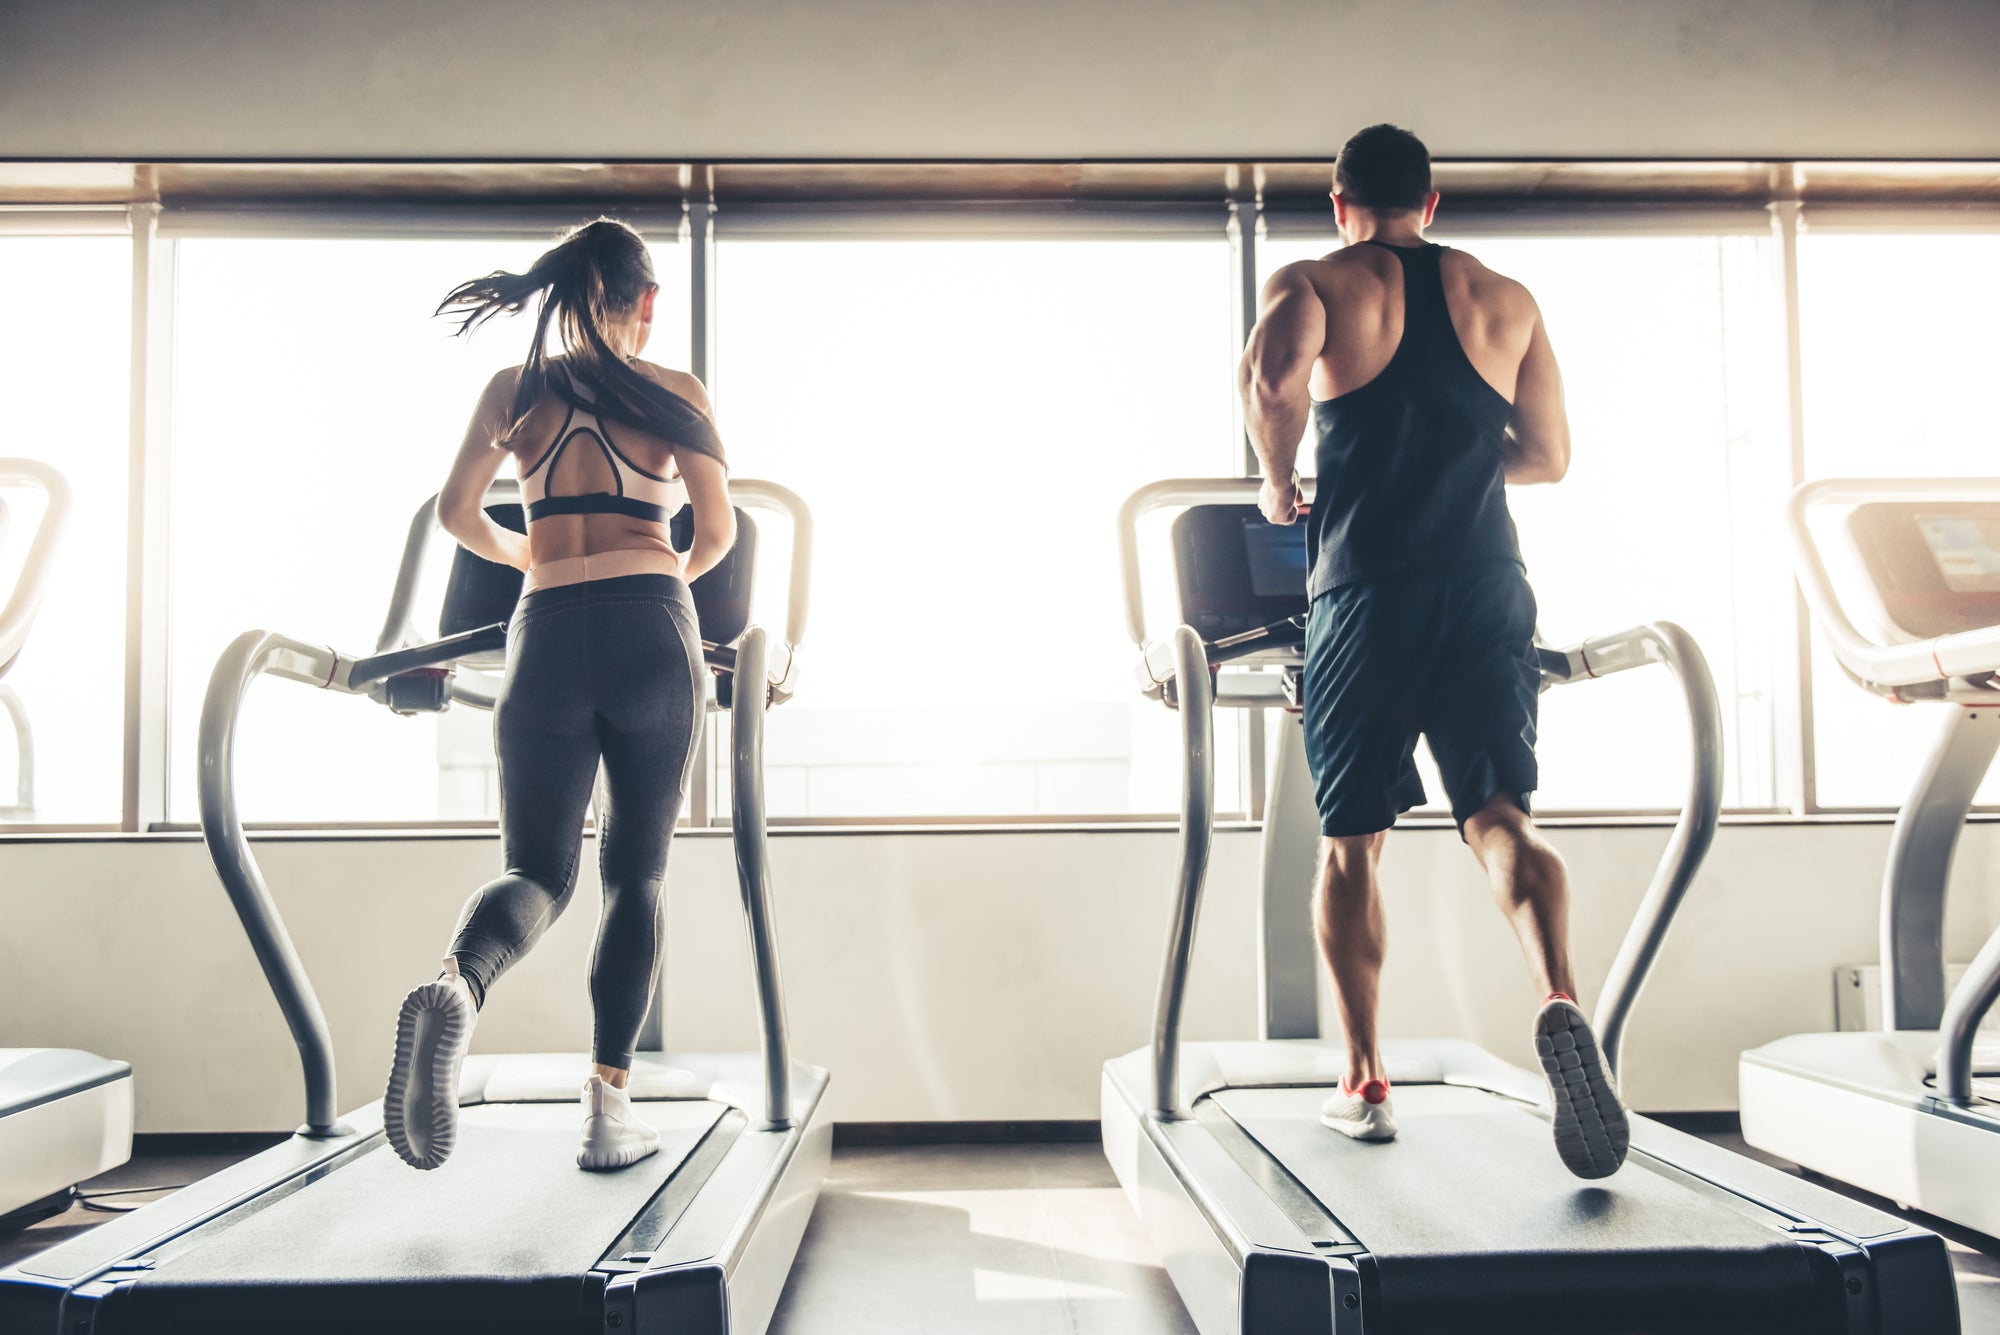 A Simple Gym Machine Workout Routine for Beginners